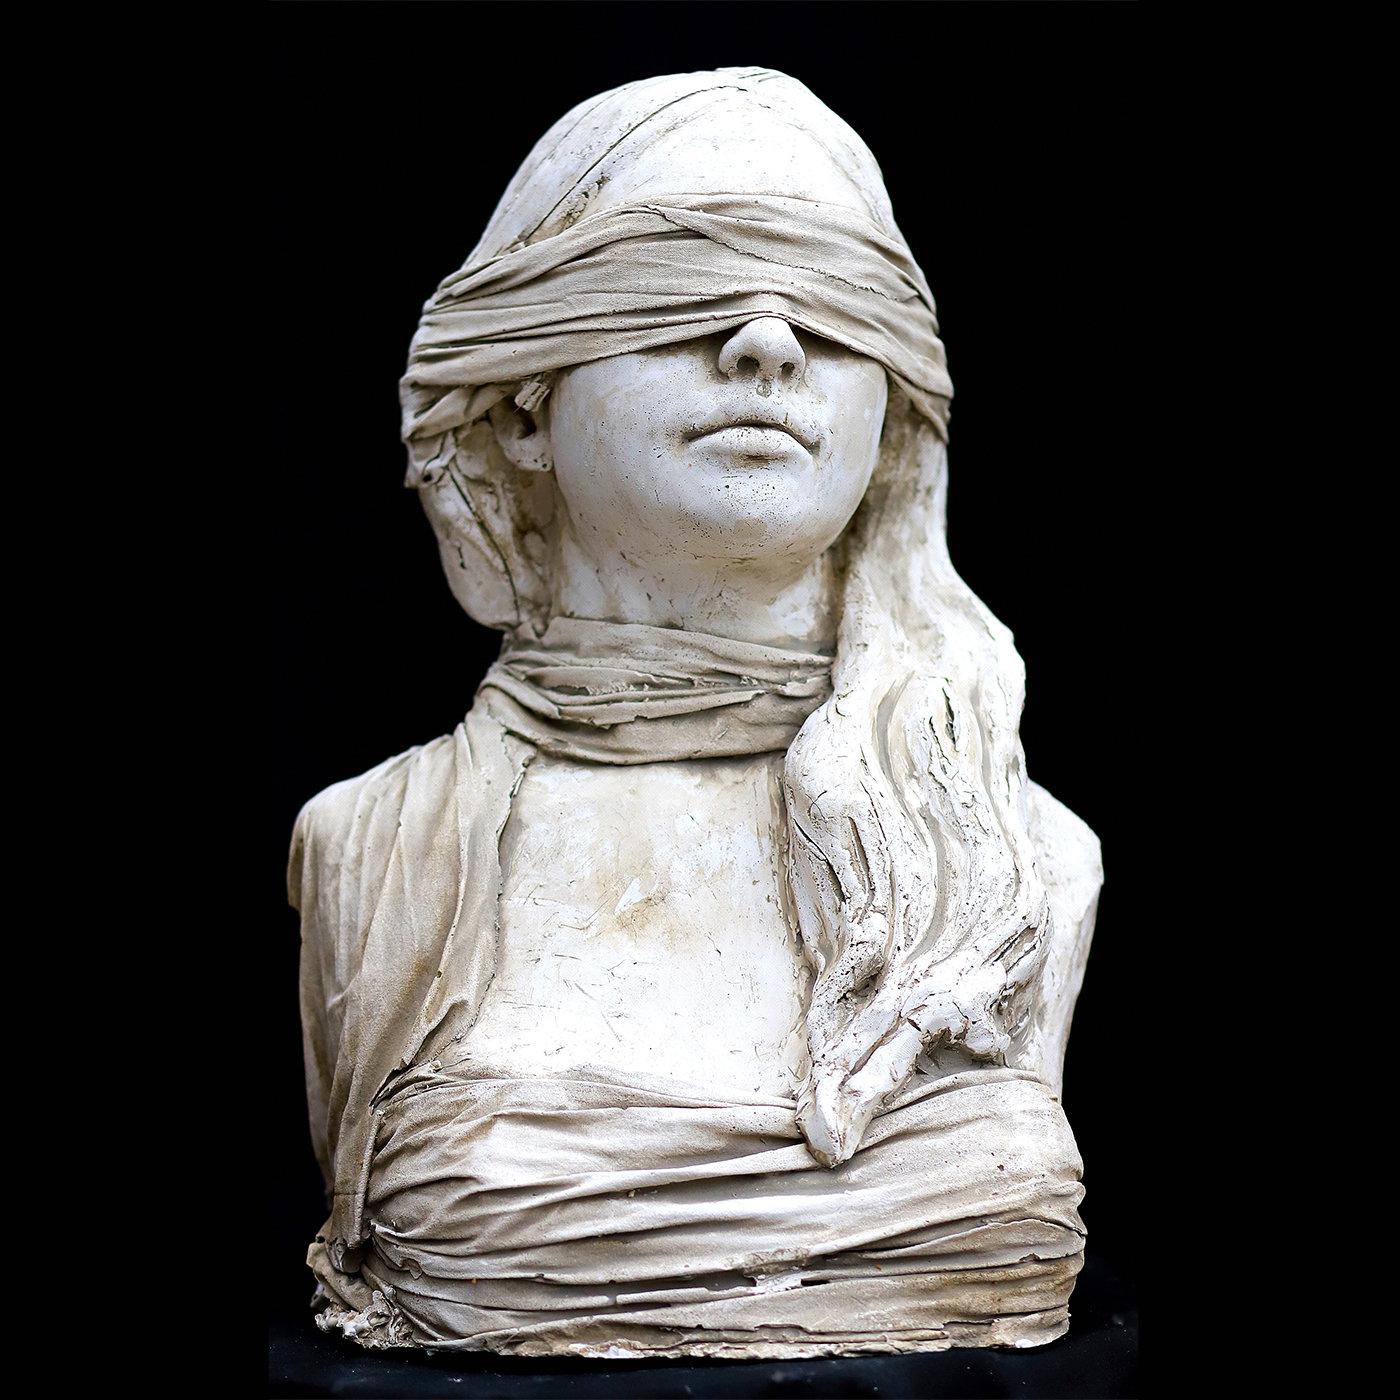 A splendid decorative object that will embellish any home or office, this magnificent work of art is handcrafted of plaster by sculptor Raffaello Romanelli in 2020. It depicts the bust of a blindfolded woman representing the Roman goddess Fortuna, a